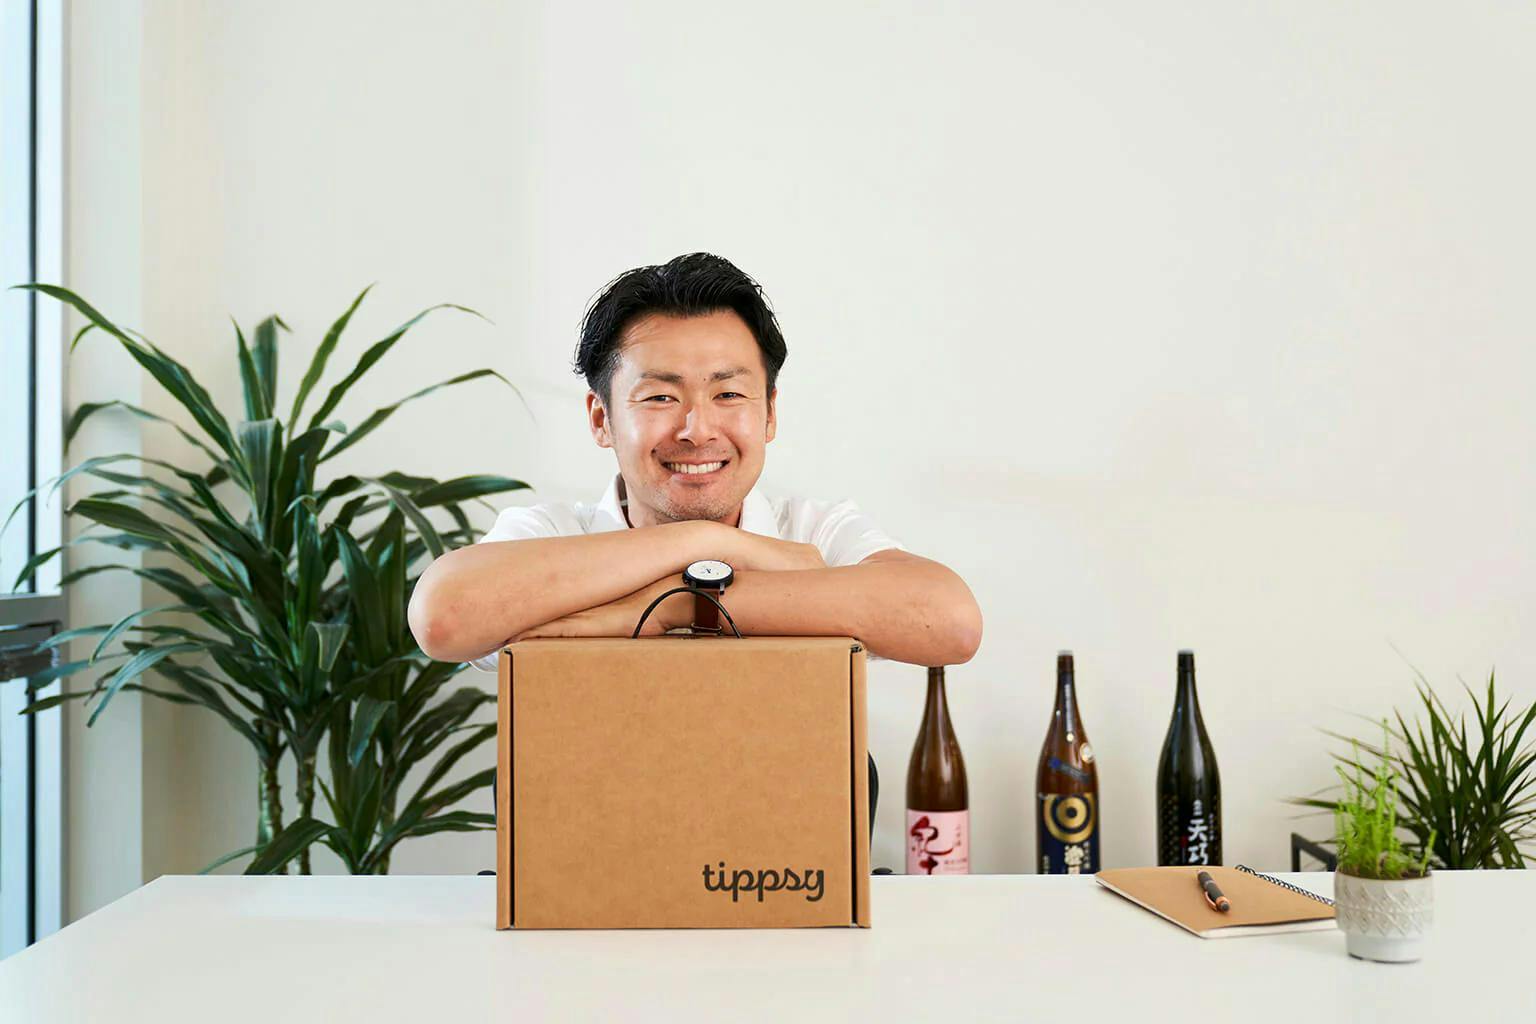 CEO Genki Ito launched TippsySake.com so Americans could access an incredible variety of sake with ease. Customers can purchase individual bottles as well as subscribe to Tippsy Sake Club, a first-of-its-kind service that provides members with expertly curated sake recommendations based on personal taste.